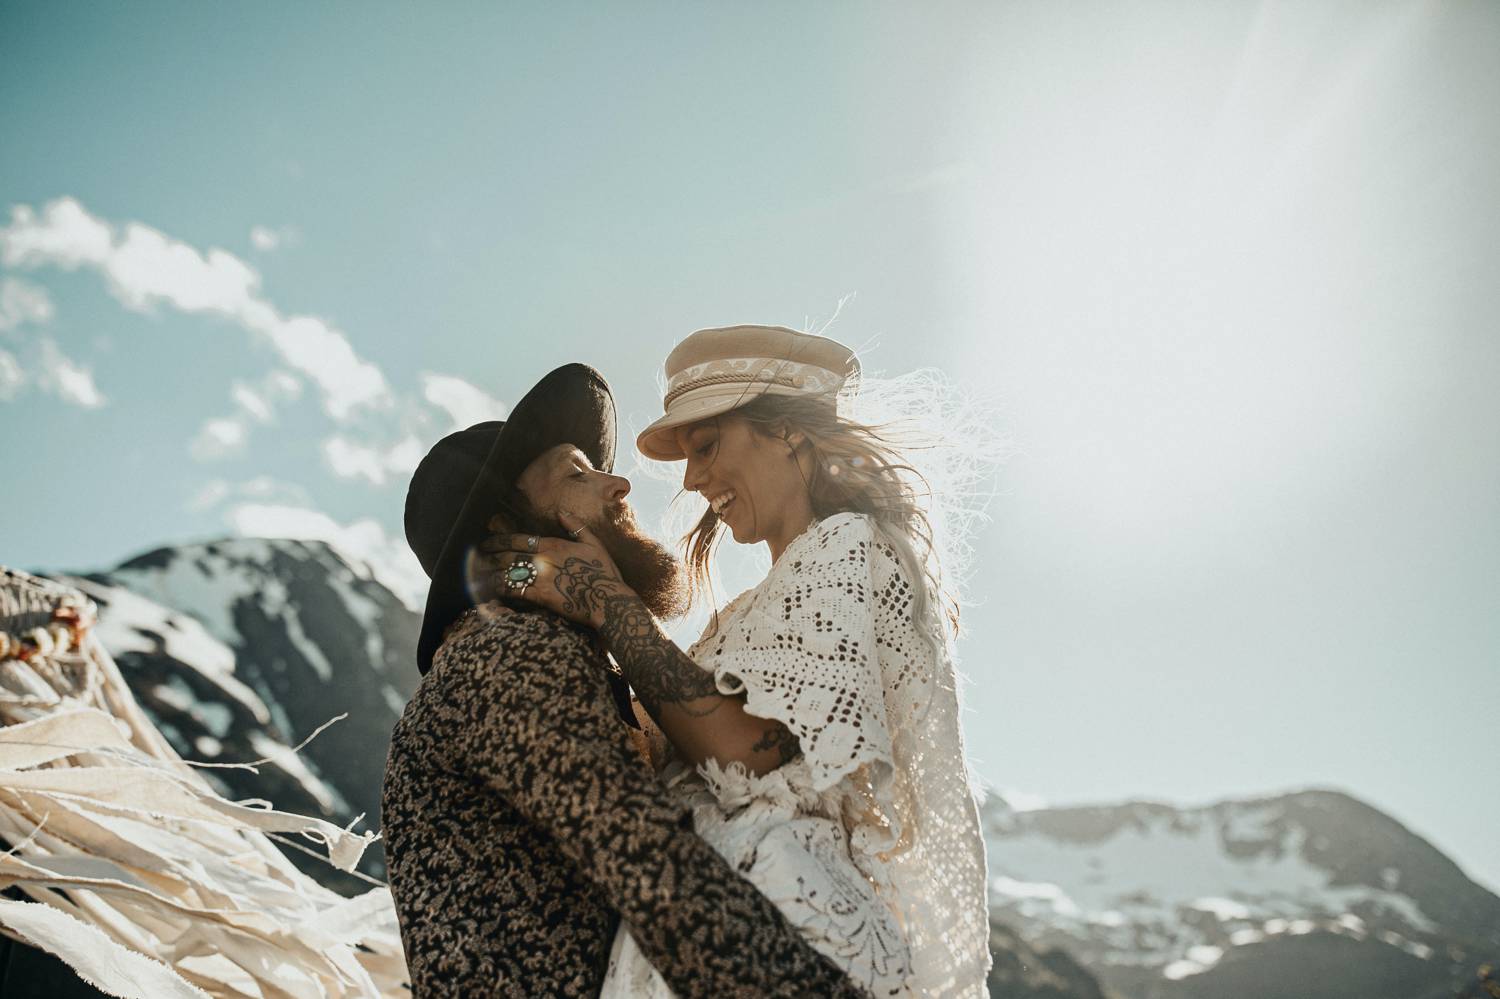 A man in a black hat lifts a woman in a white hat as they smile and hug. Behind them are snow covered mountains.